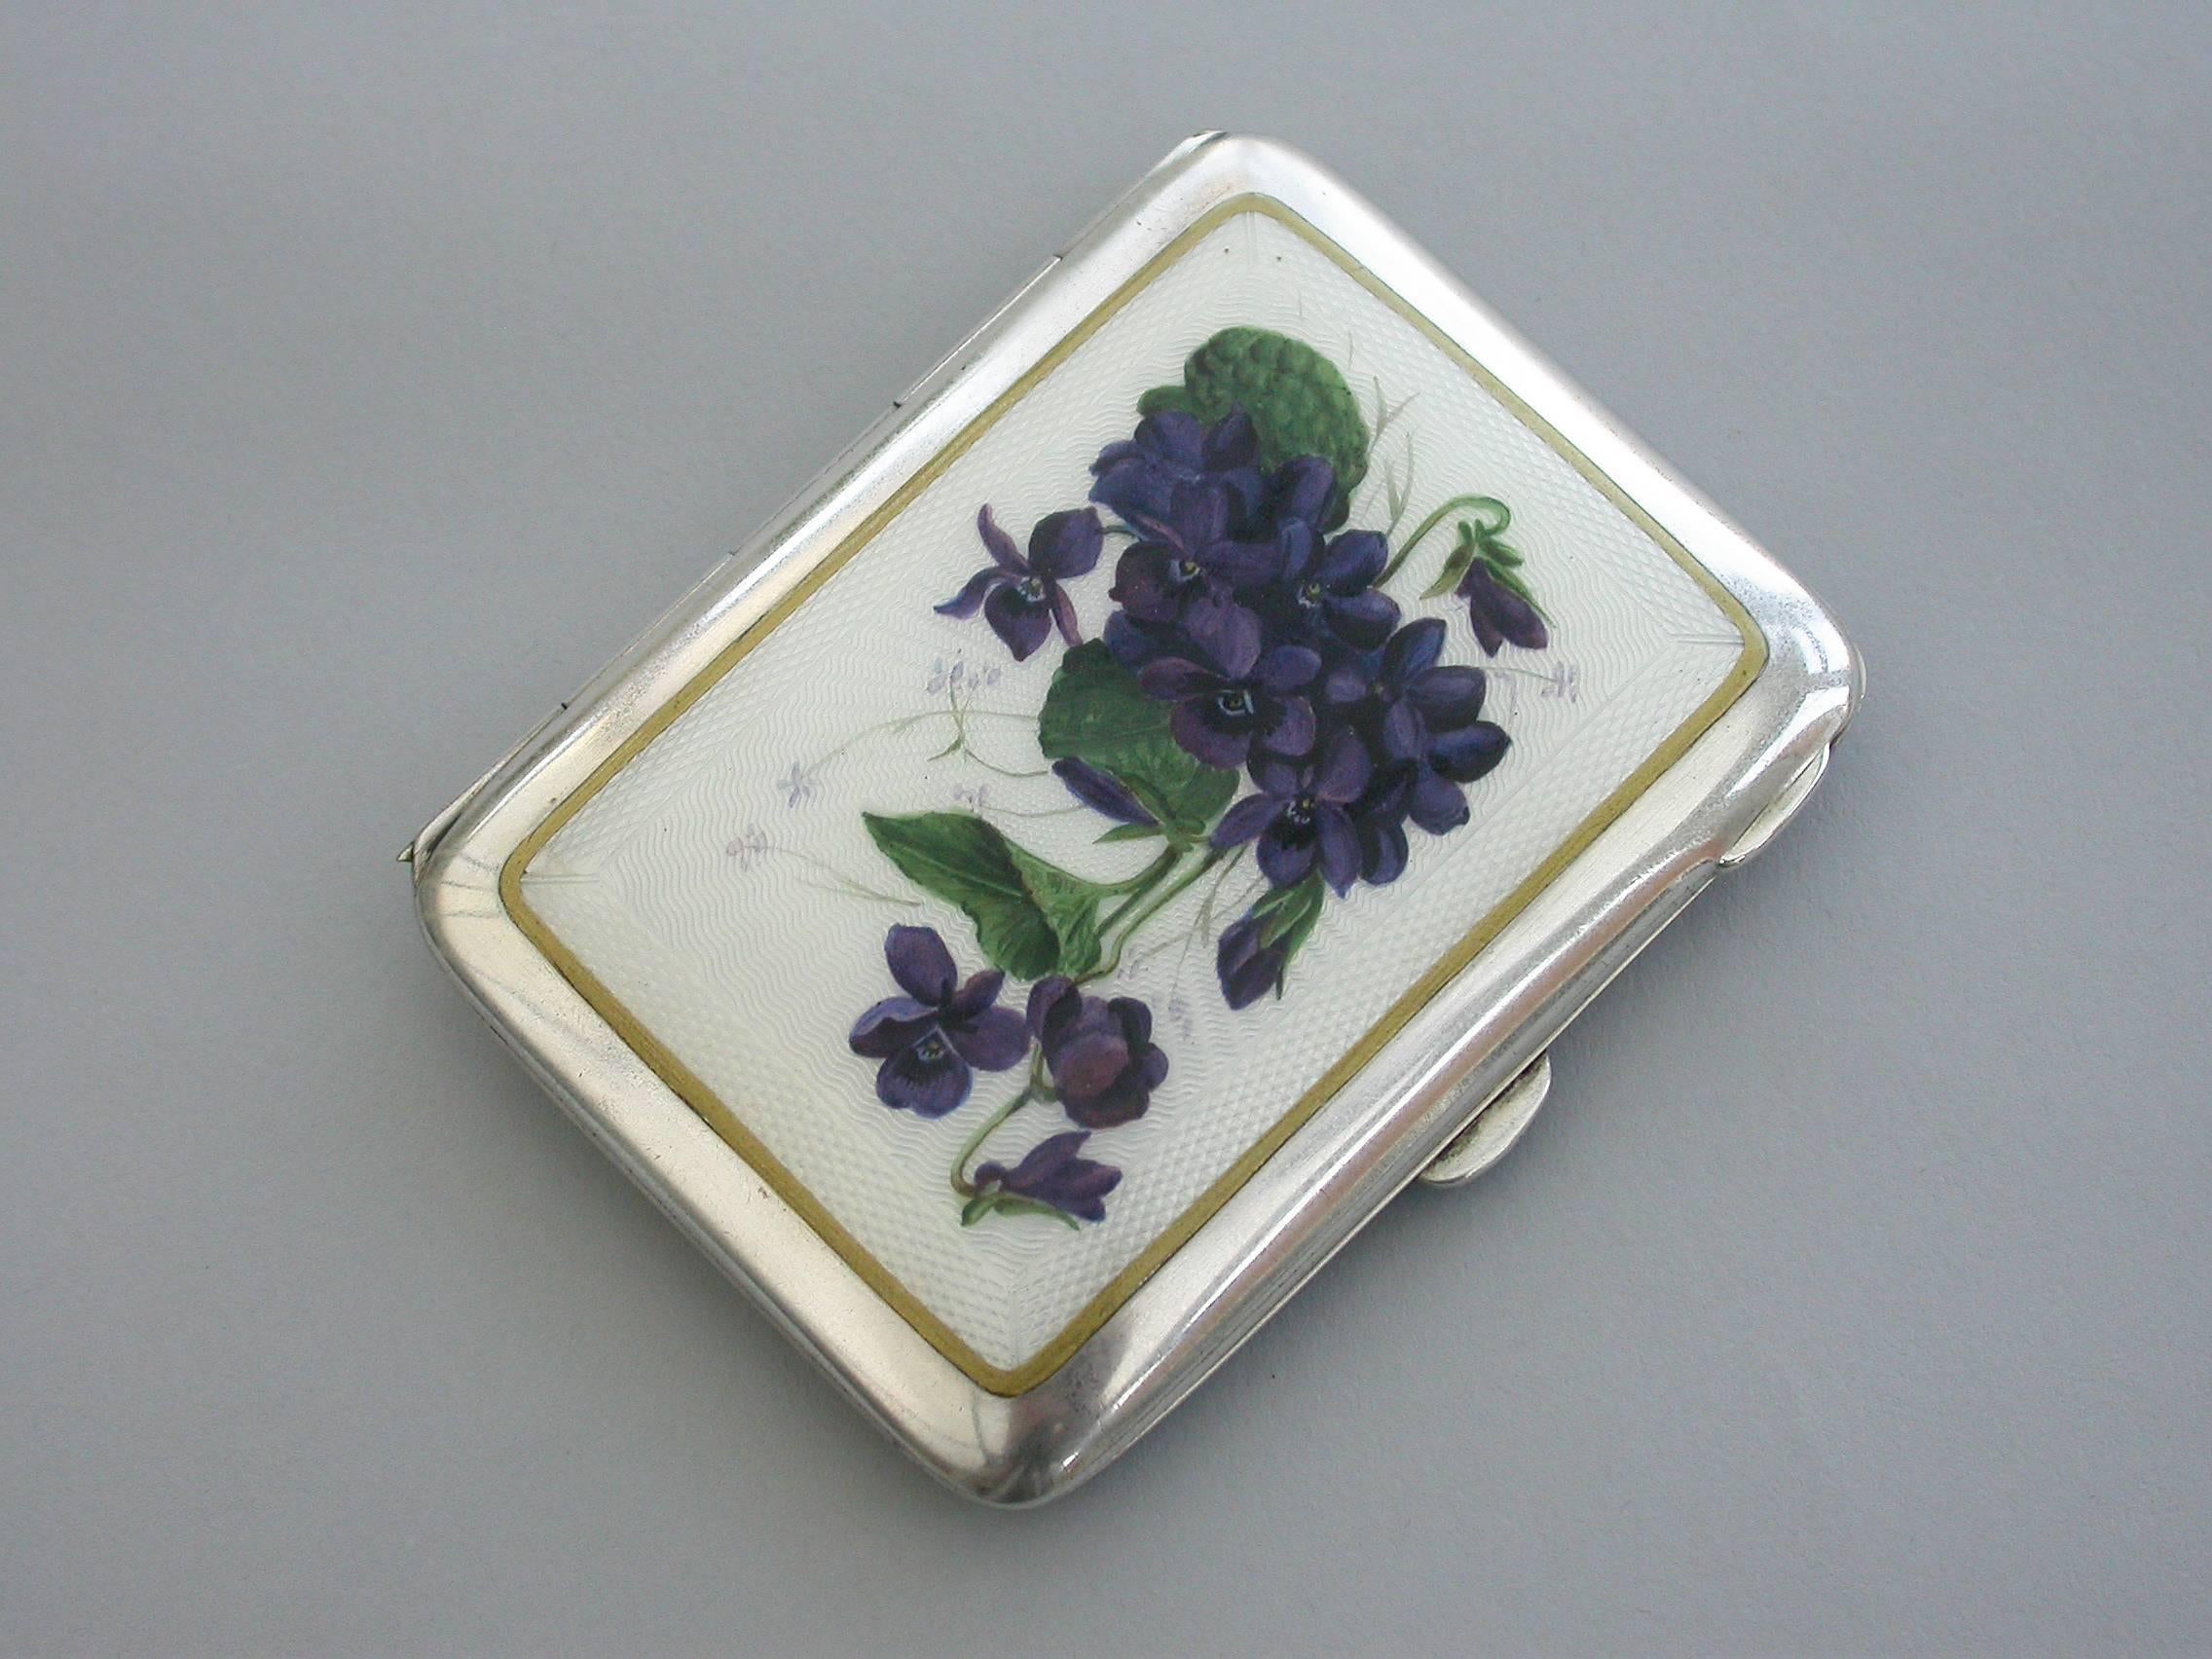 English Early 20th Century Silver and Guilloche Enamel 'Violets' Cigarette Case, 1915